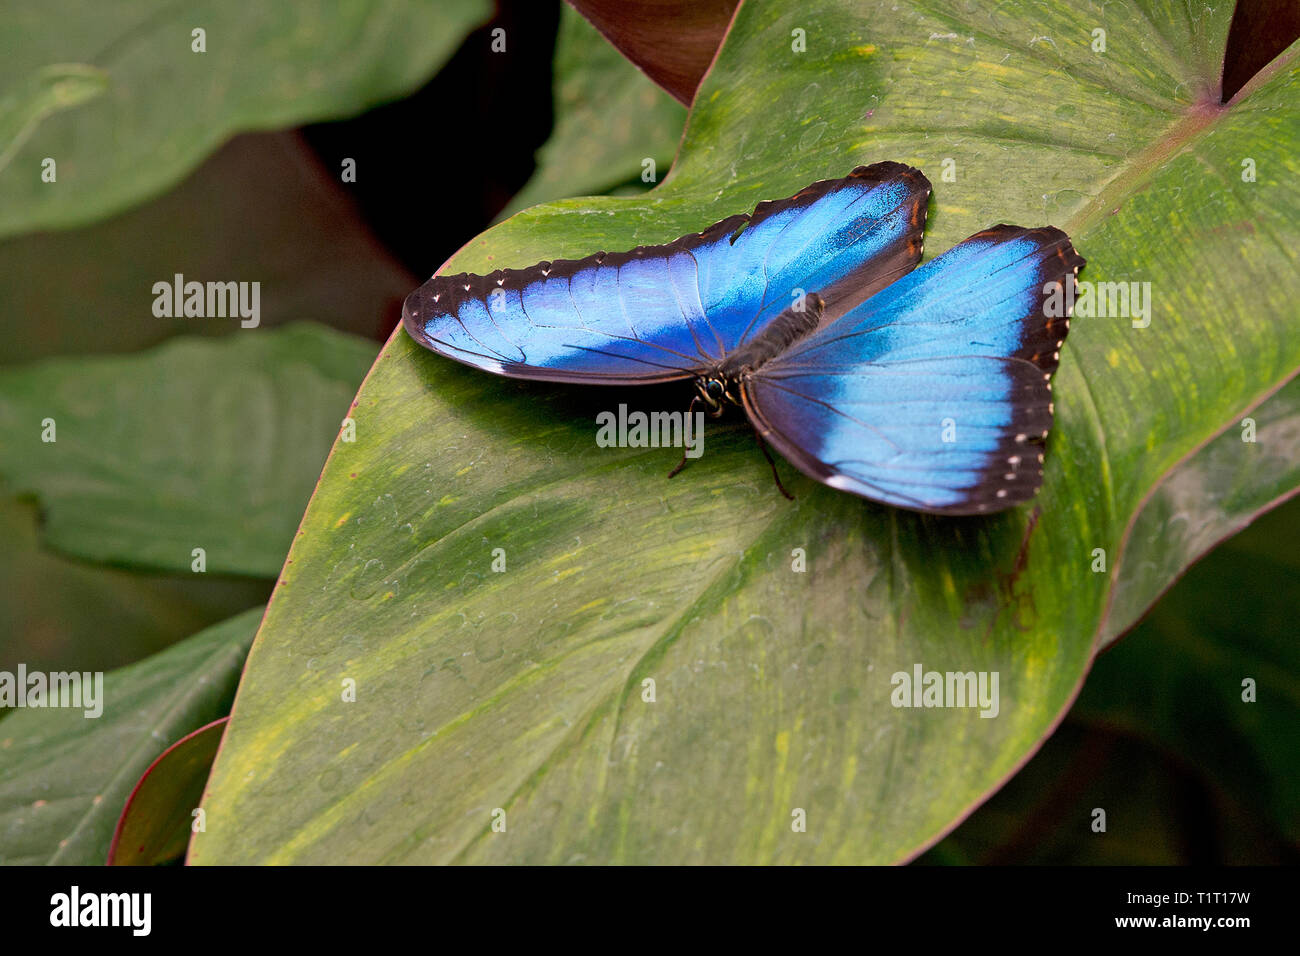 Blue Morpho or Morpho butterfly (Morpho peleides) largest butterfly found in primary forest, Costa Rica Stock Photo